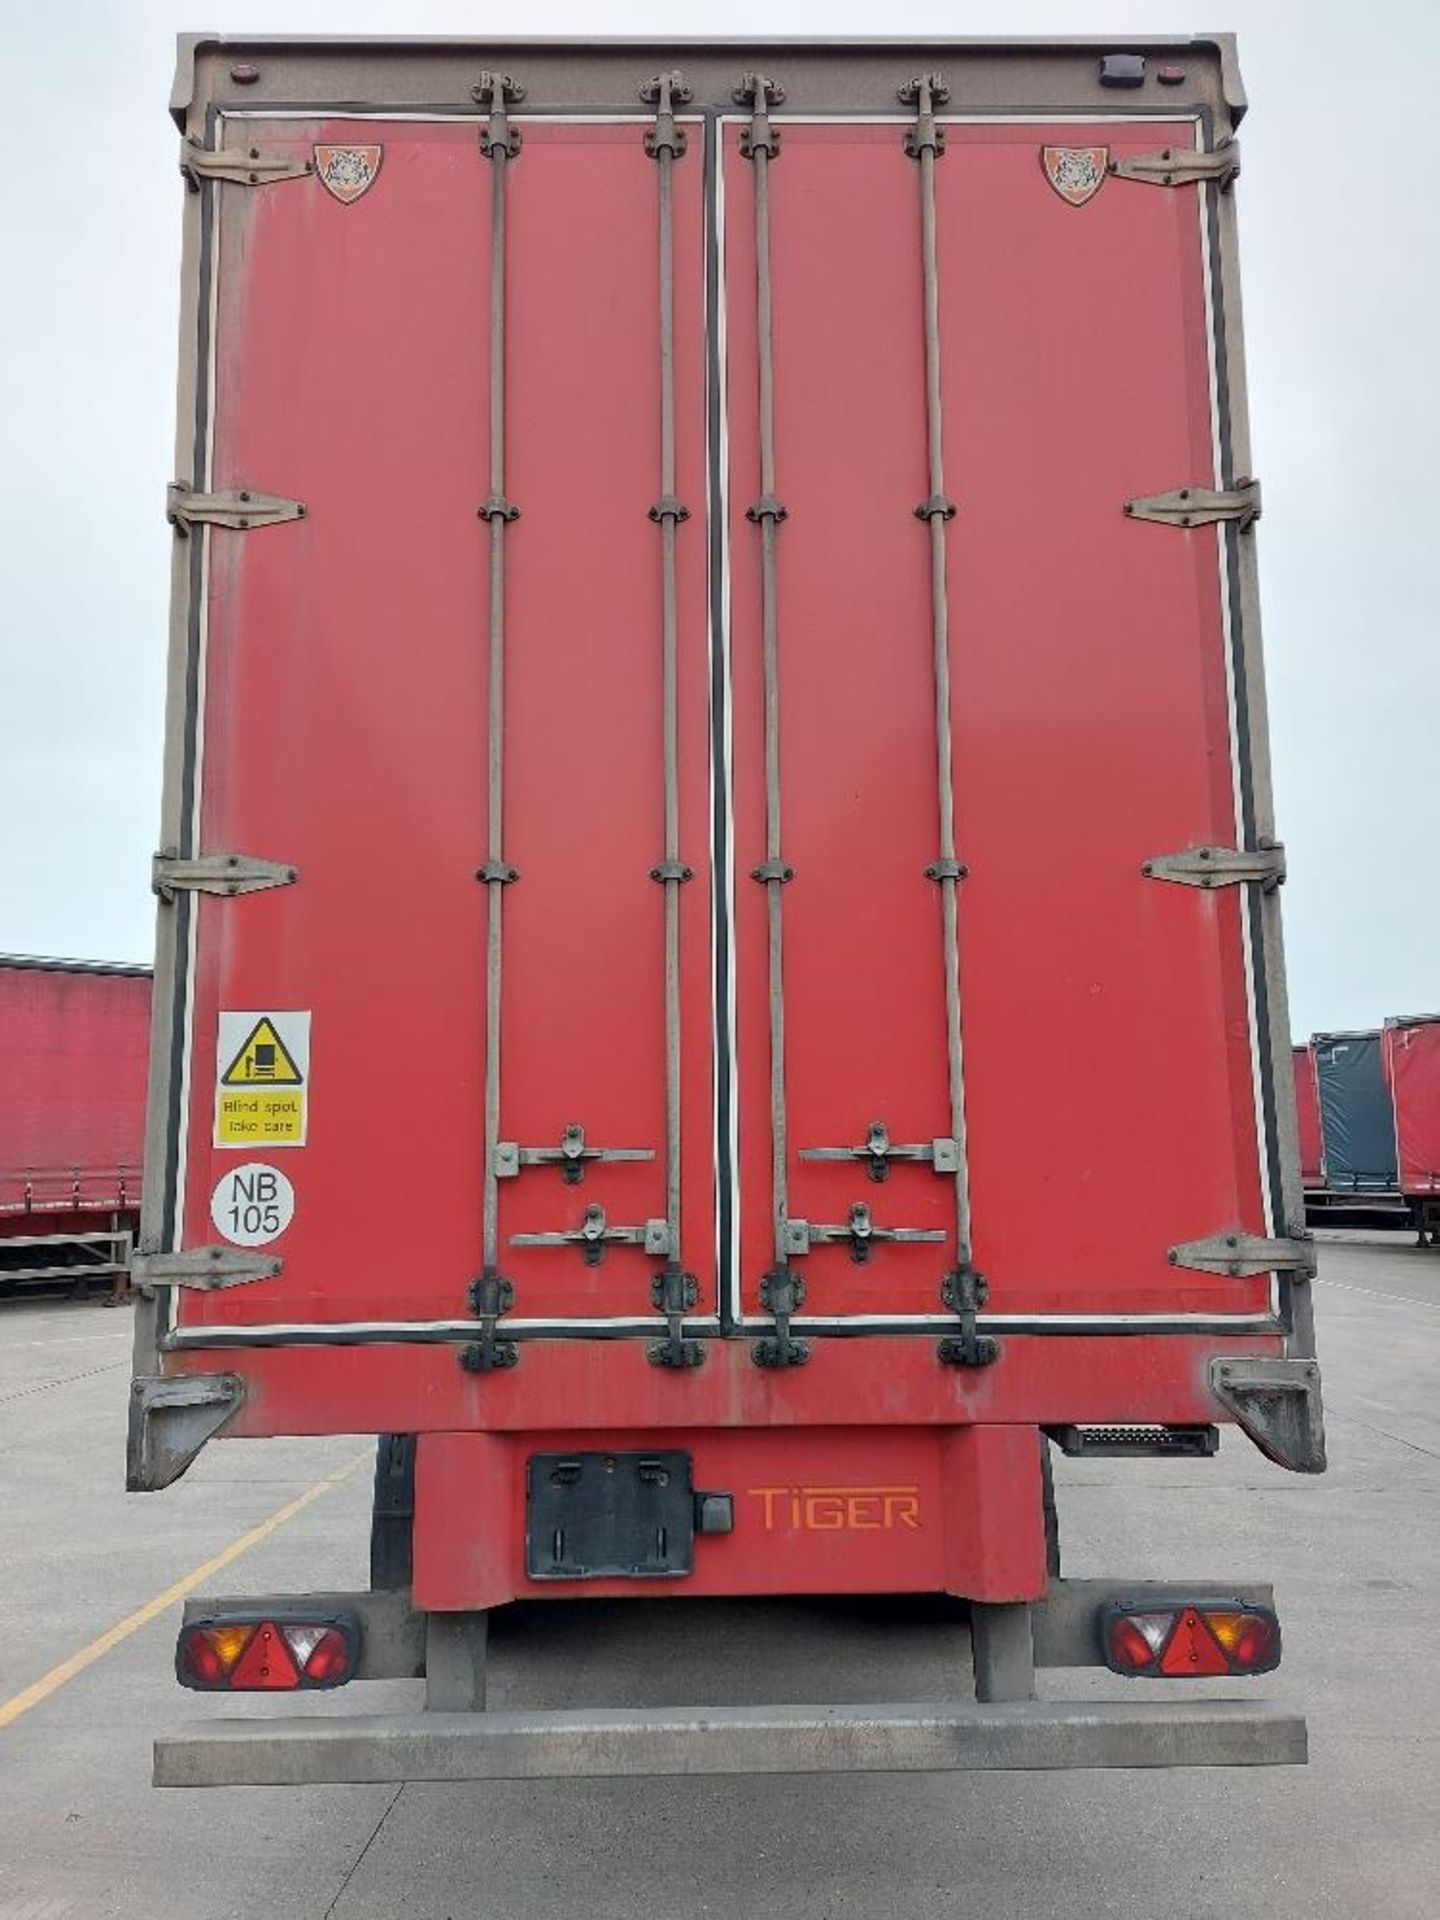 Tiger Tri-Axle 13.7m Curtain Side Trailer Unit - Image 6 of 8